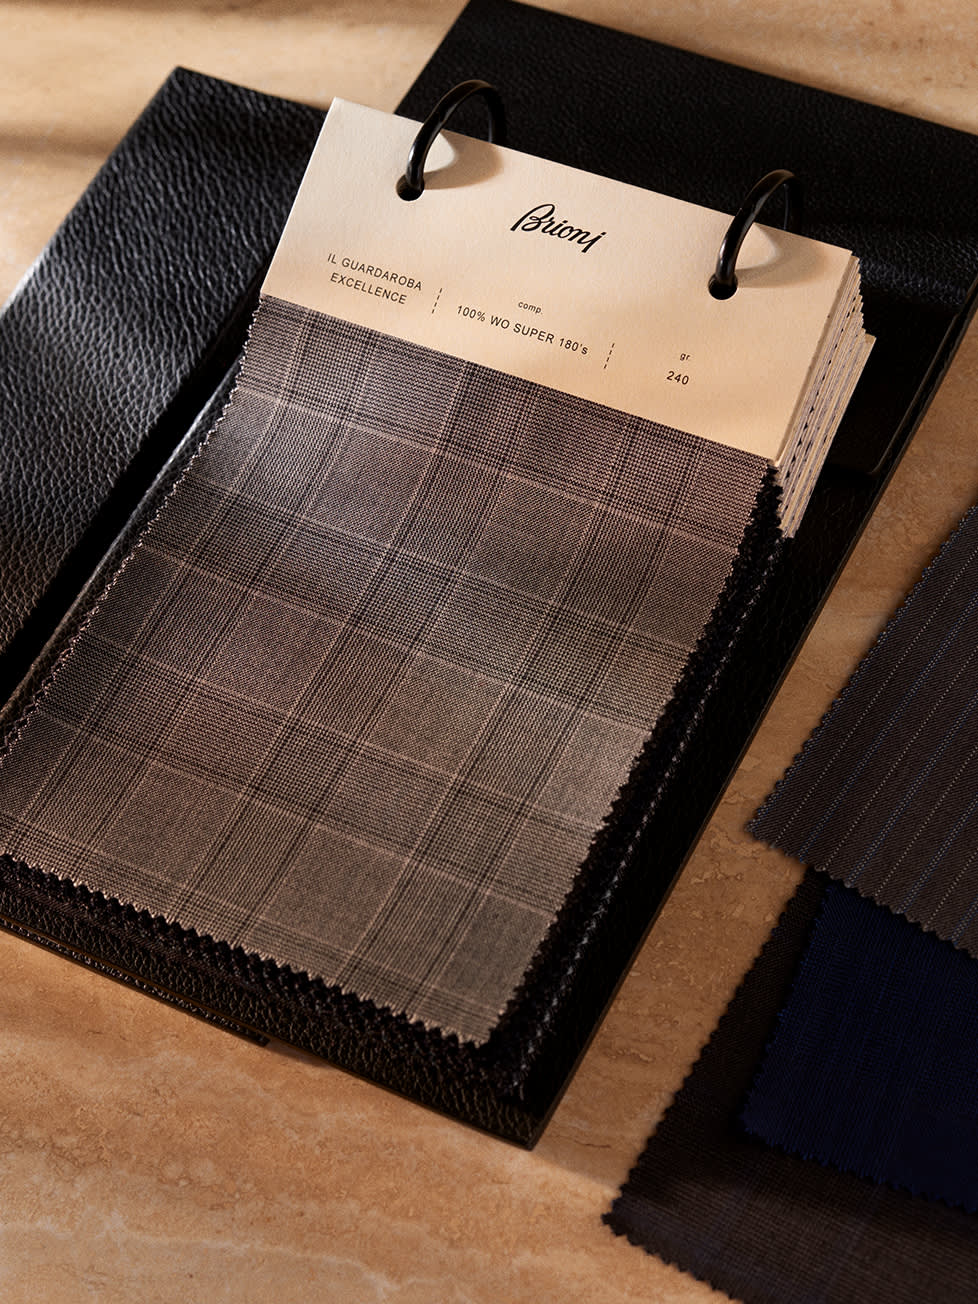 How Its Made: Brioni's Bespoke Suits